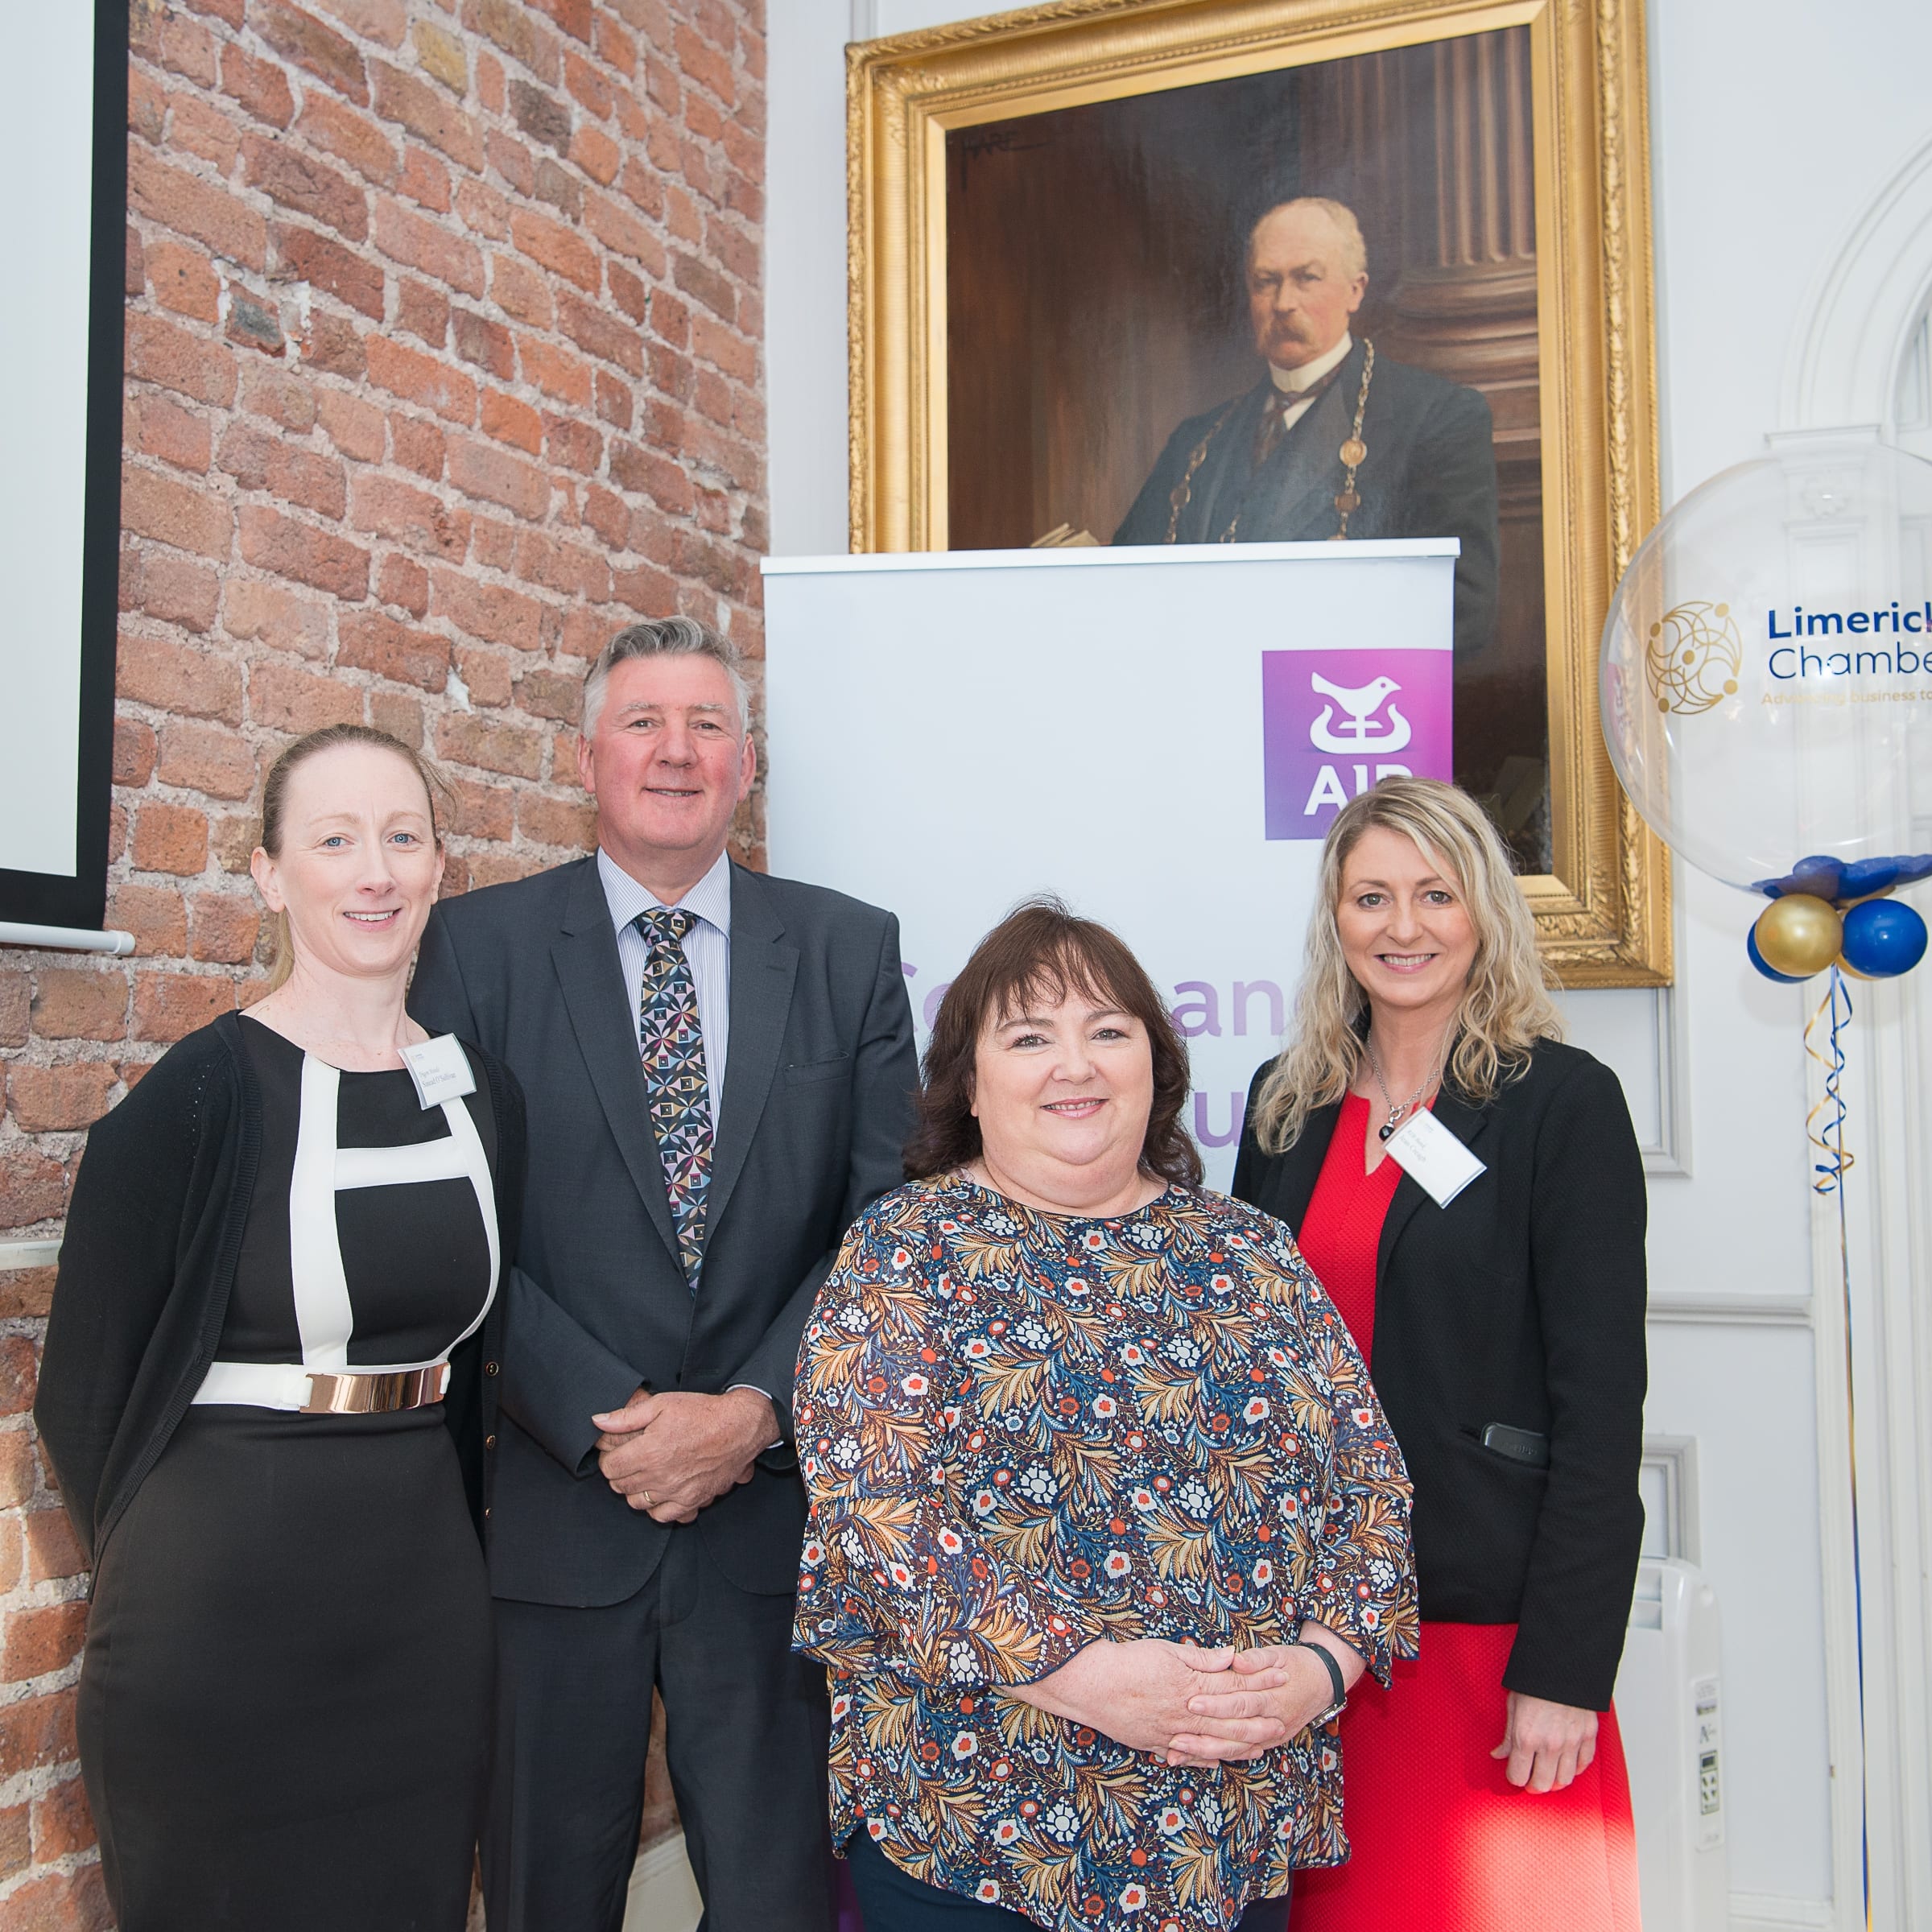 no repro fee- 
From Left to Right:  New Members Breakfast which took place on the 7th June in the Limerick Chamber Boardroom:  Sinead O’Sullivan - Trigon Hotels, Dermot Graham - AIB, Mary Egan - Limerick Chamber, Jean Creagh - AIB. 
Photo by Morning Star Photography